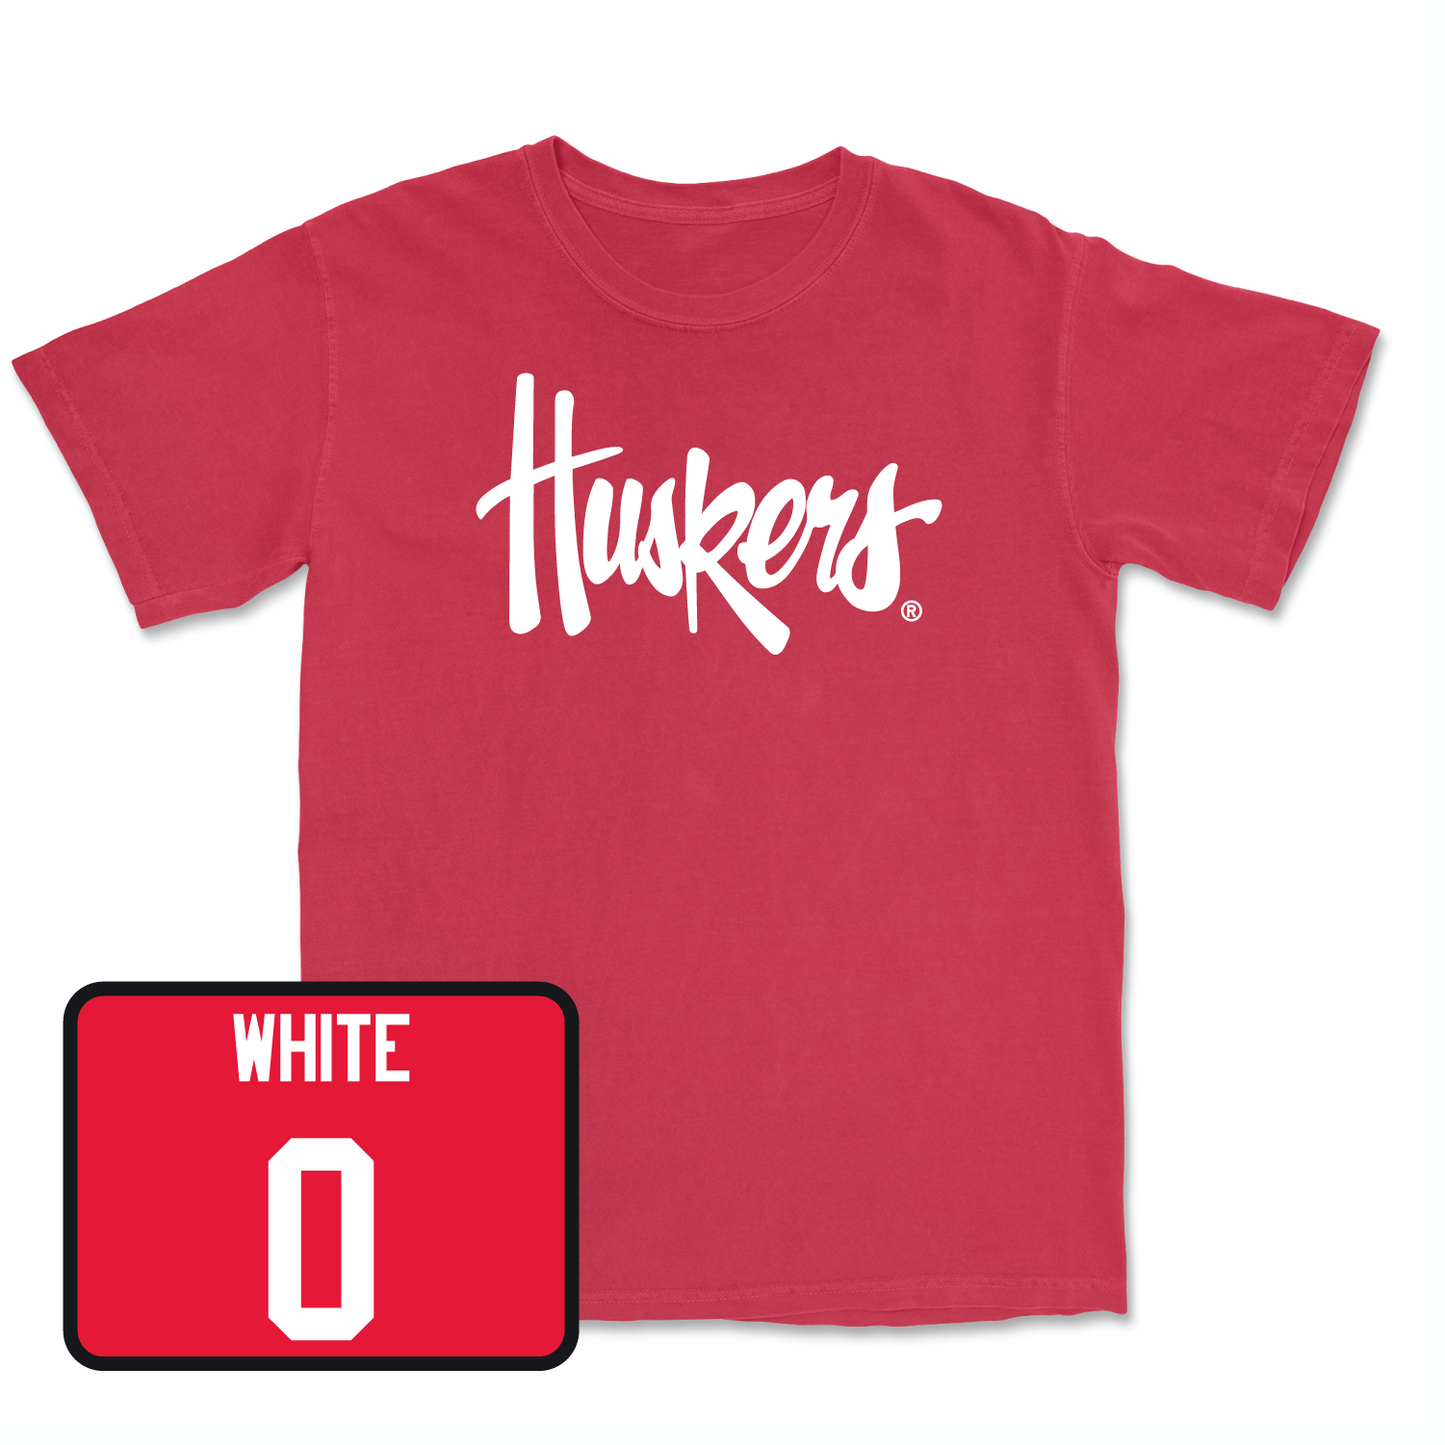 Red Women's Basketball Huskers Tee Small / Darian White | #0